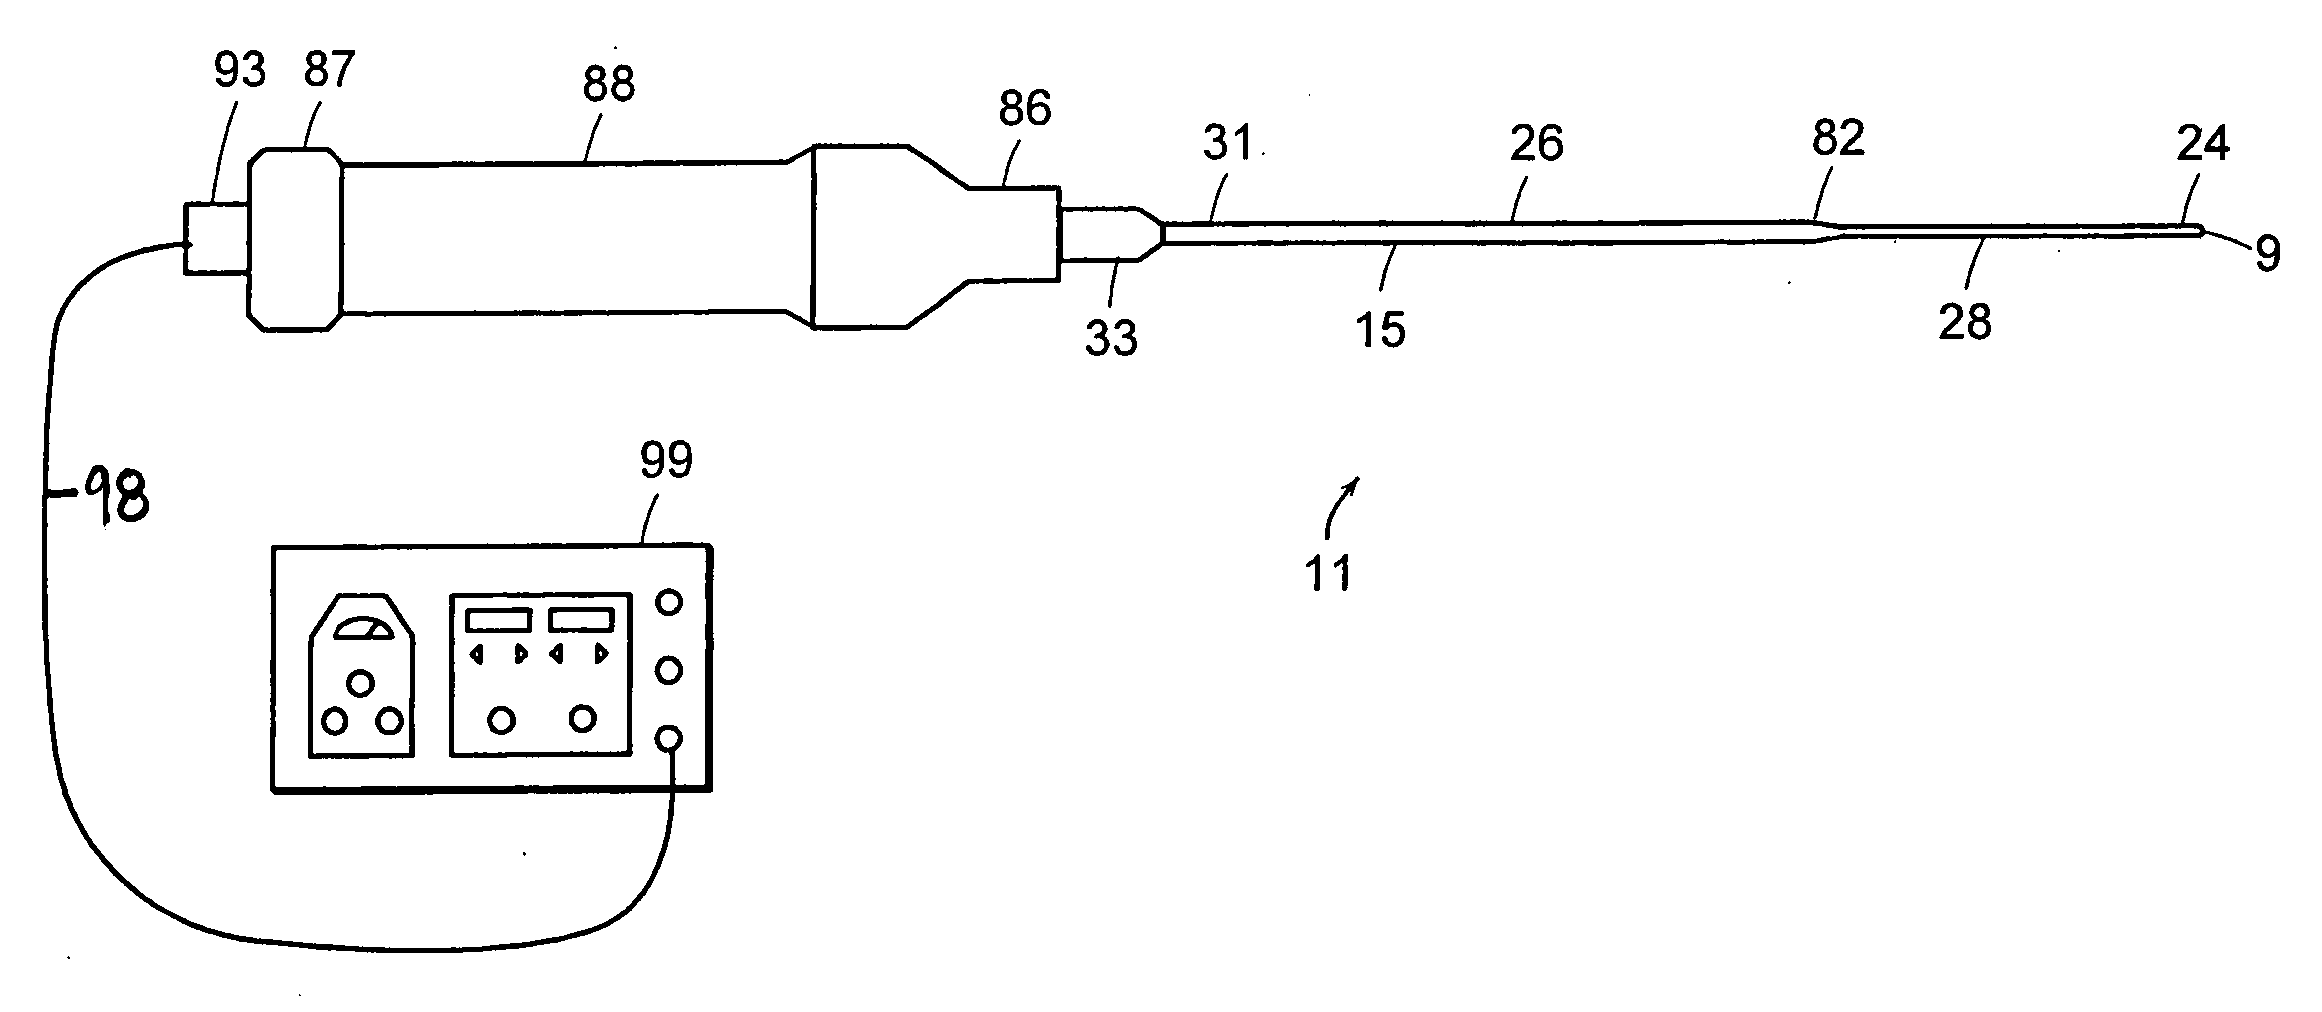 Apparatus and method for using an ultrasonic medical device to reinforce bone